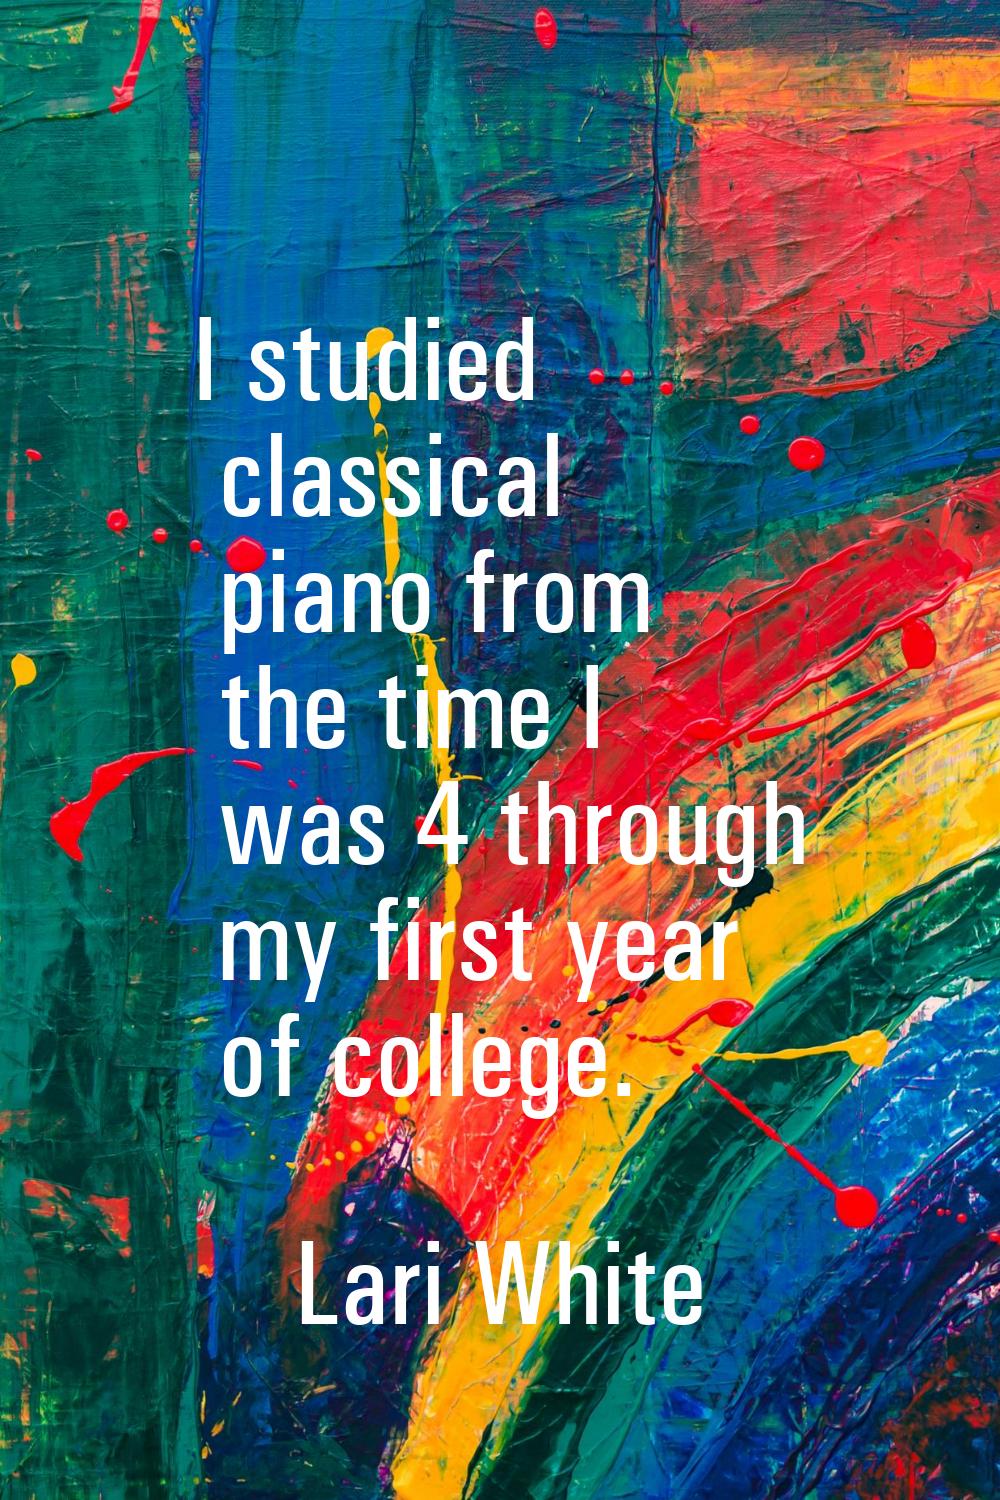 I studied classical piano from the time I was 4 through my first year of college.